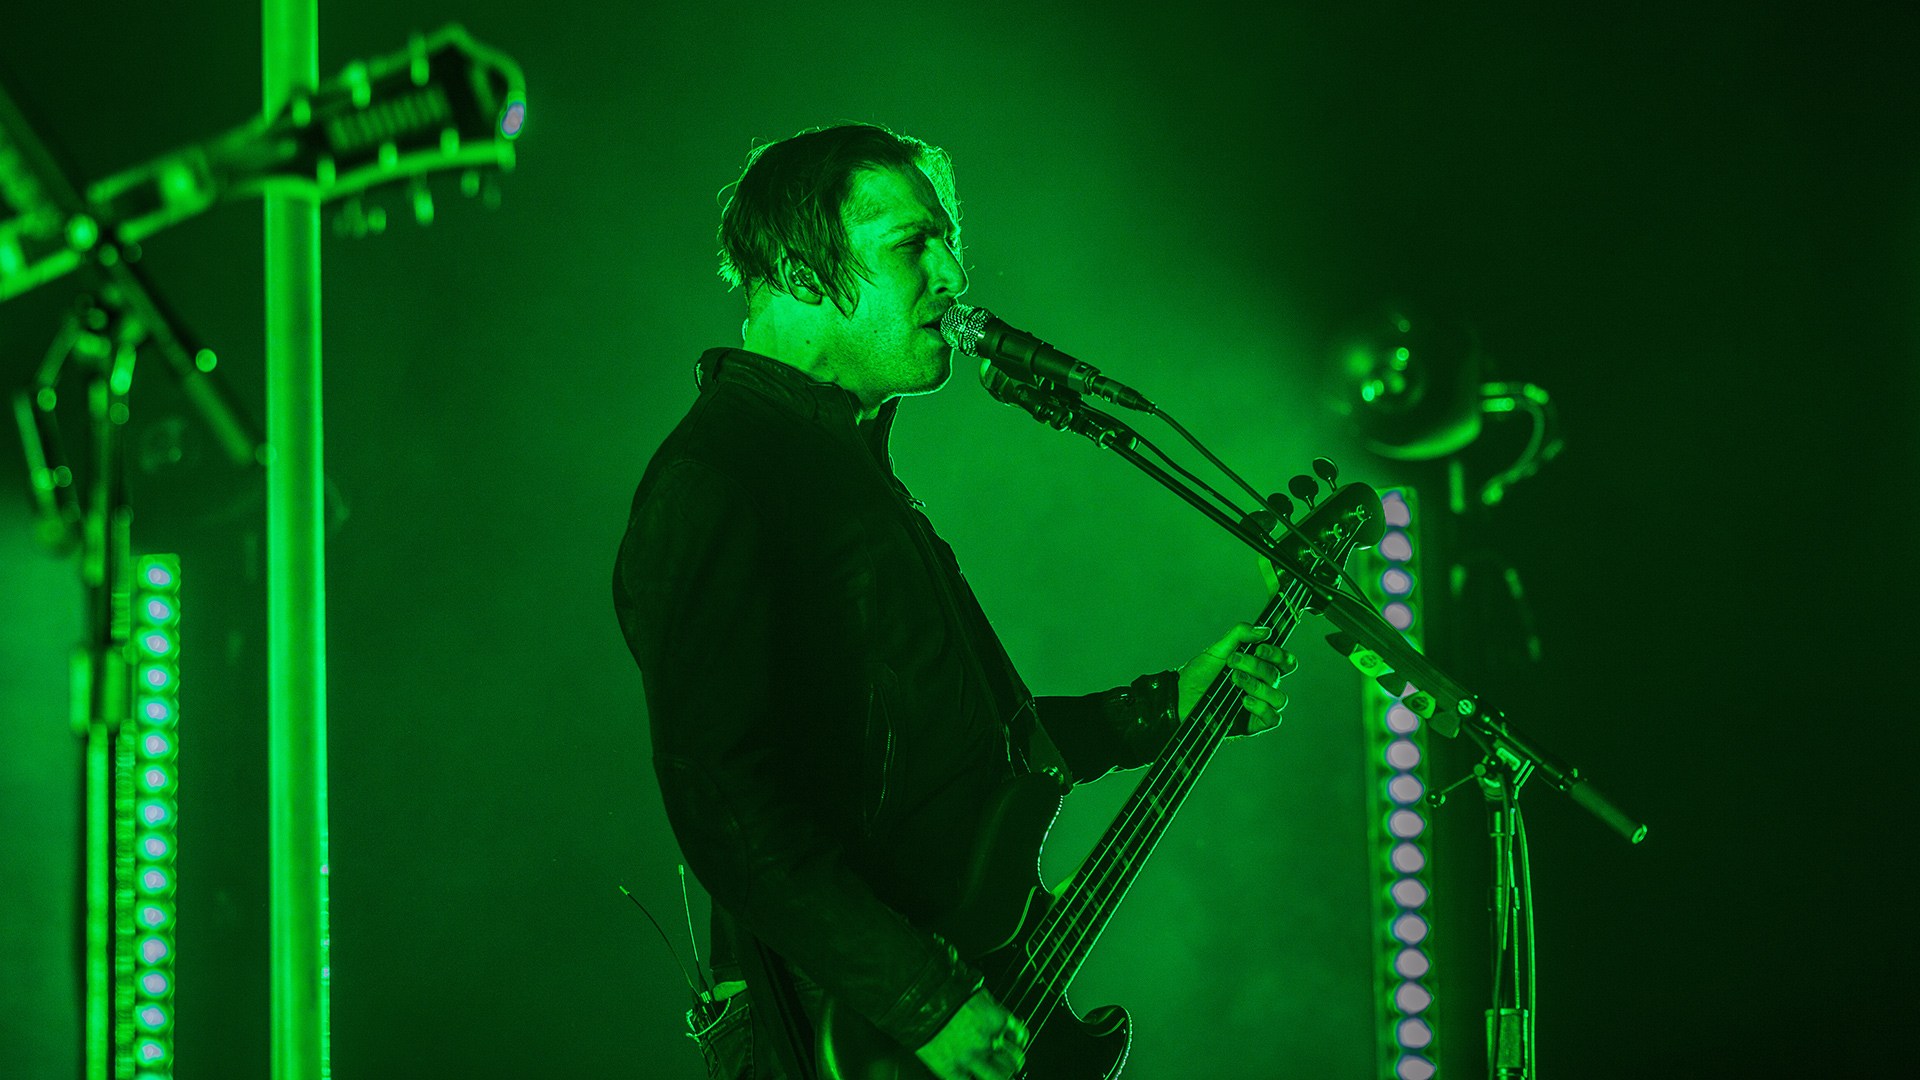 Queens Of The Stone Age live am 11. November 2017 in Berlin